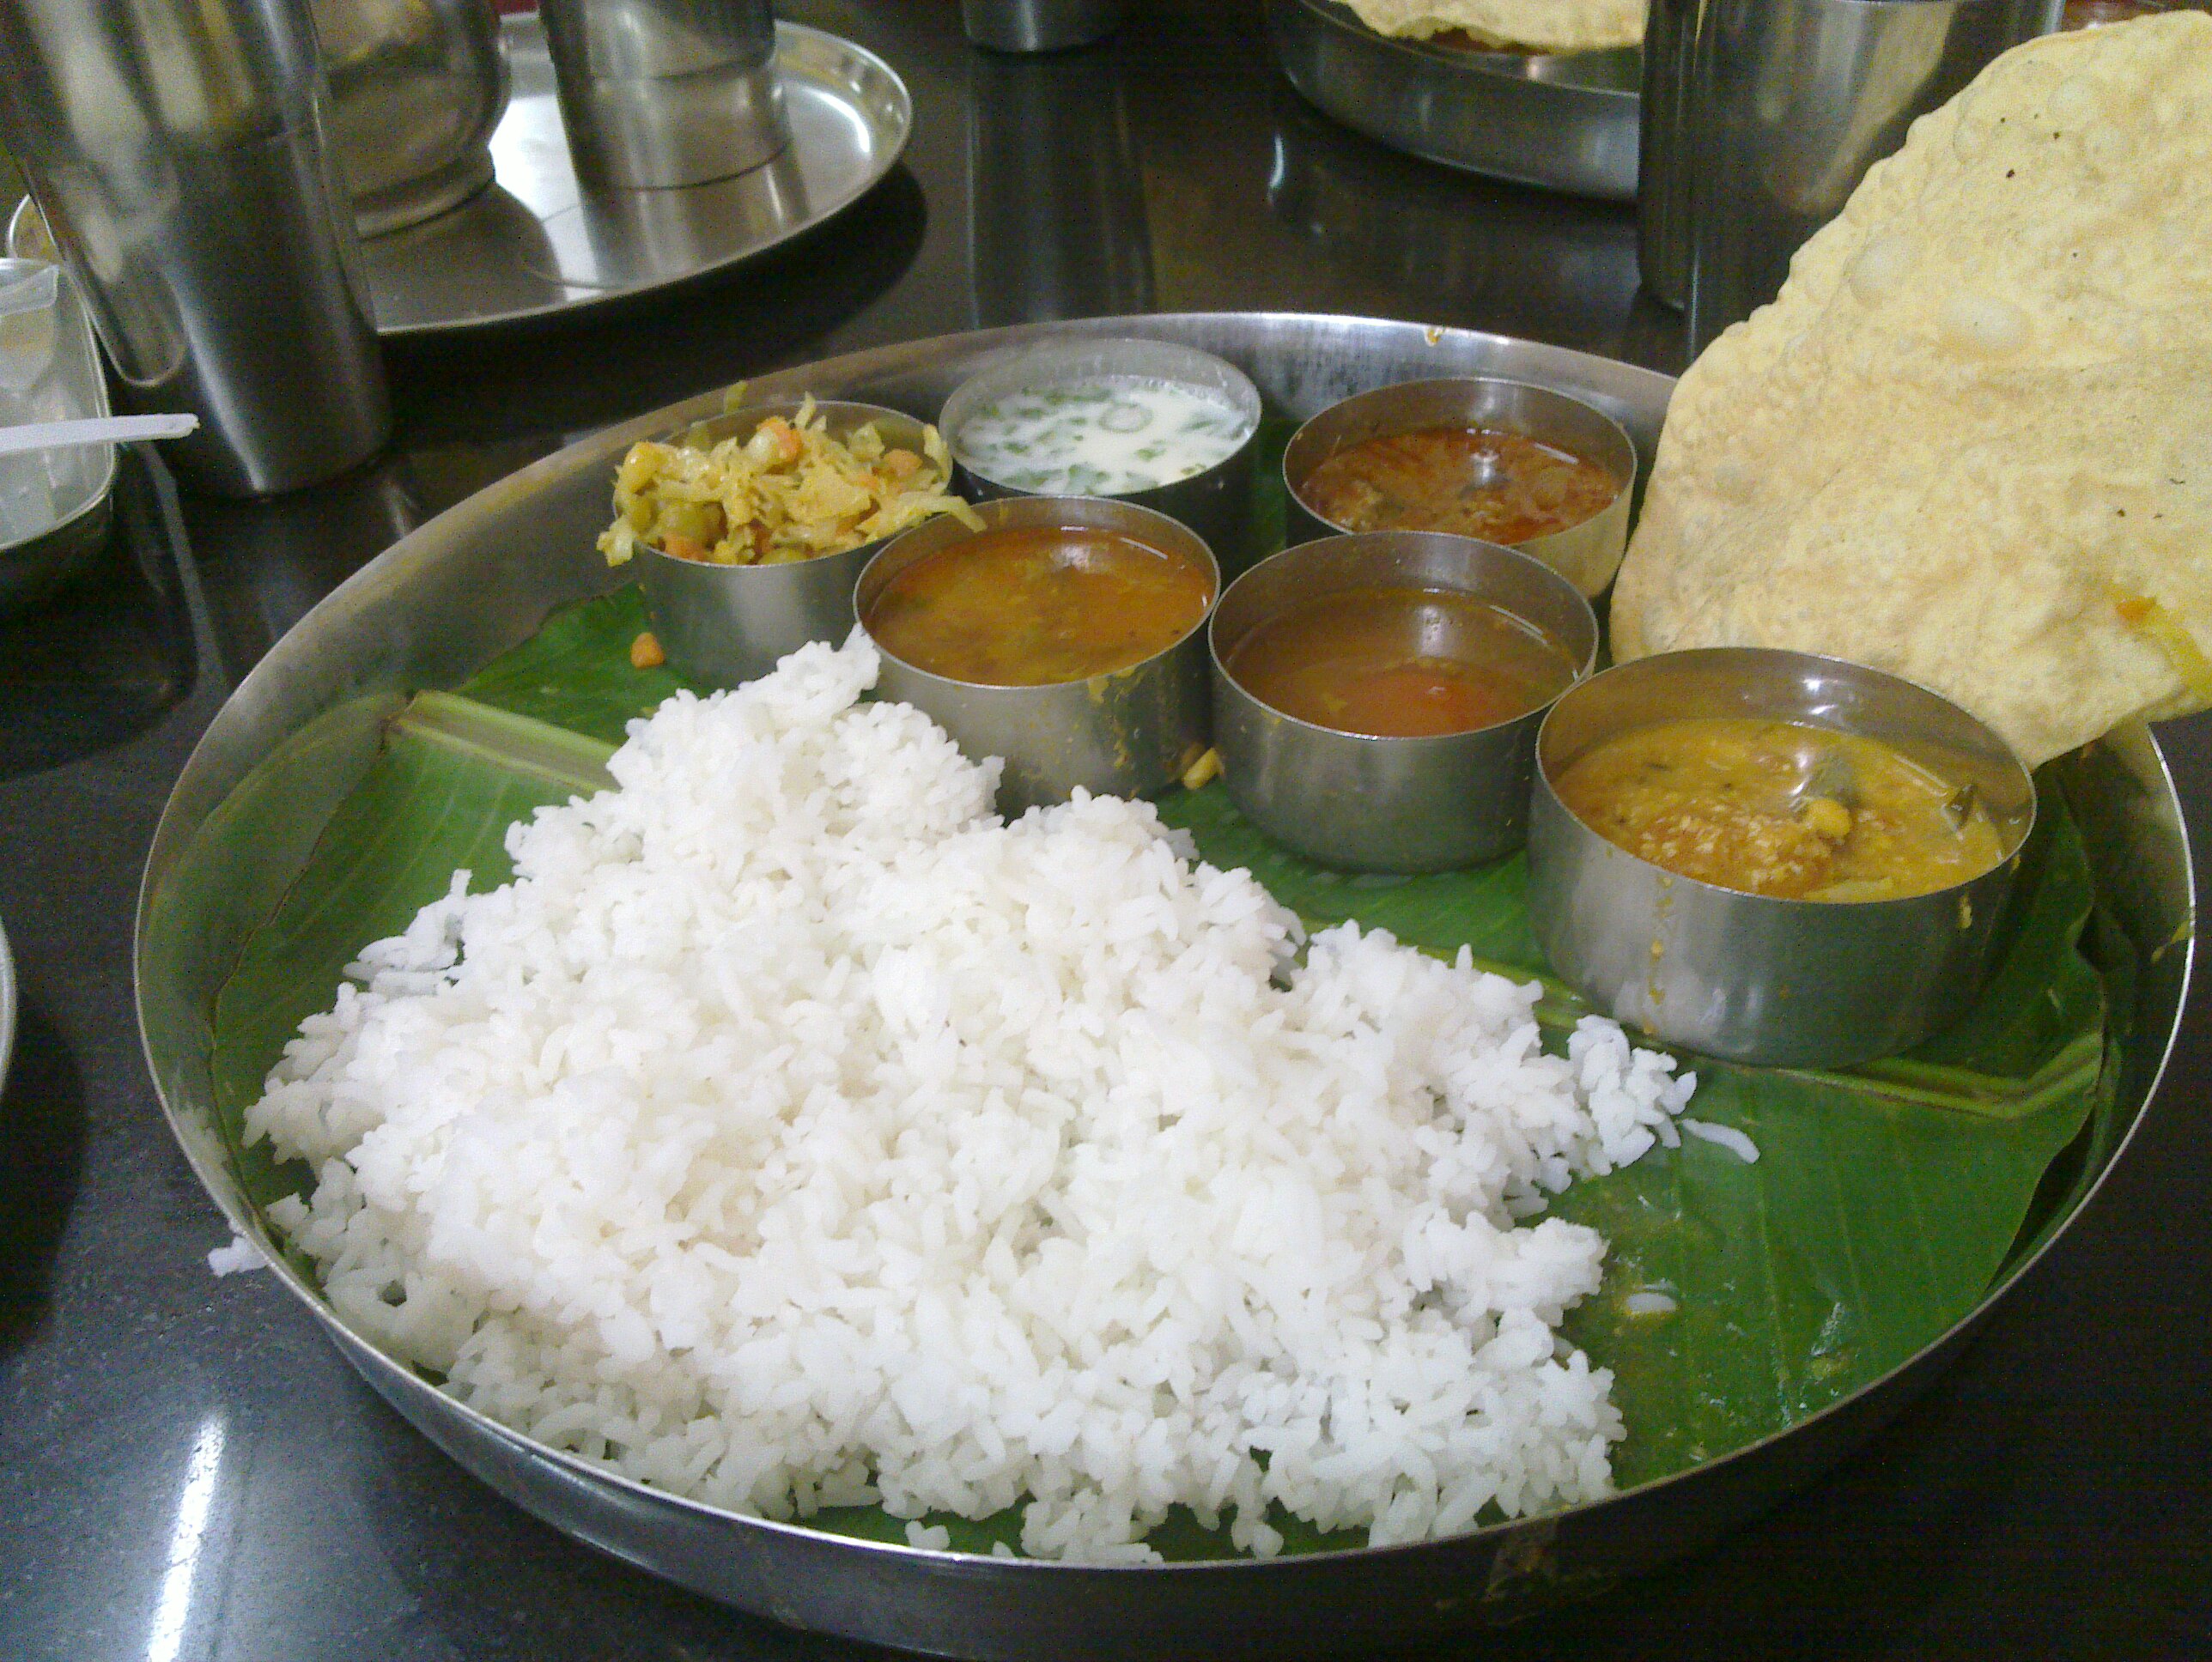 A-_SOUTH_INDIAN_FOOD_AFTER_SERVING